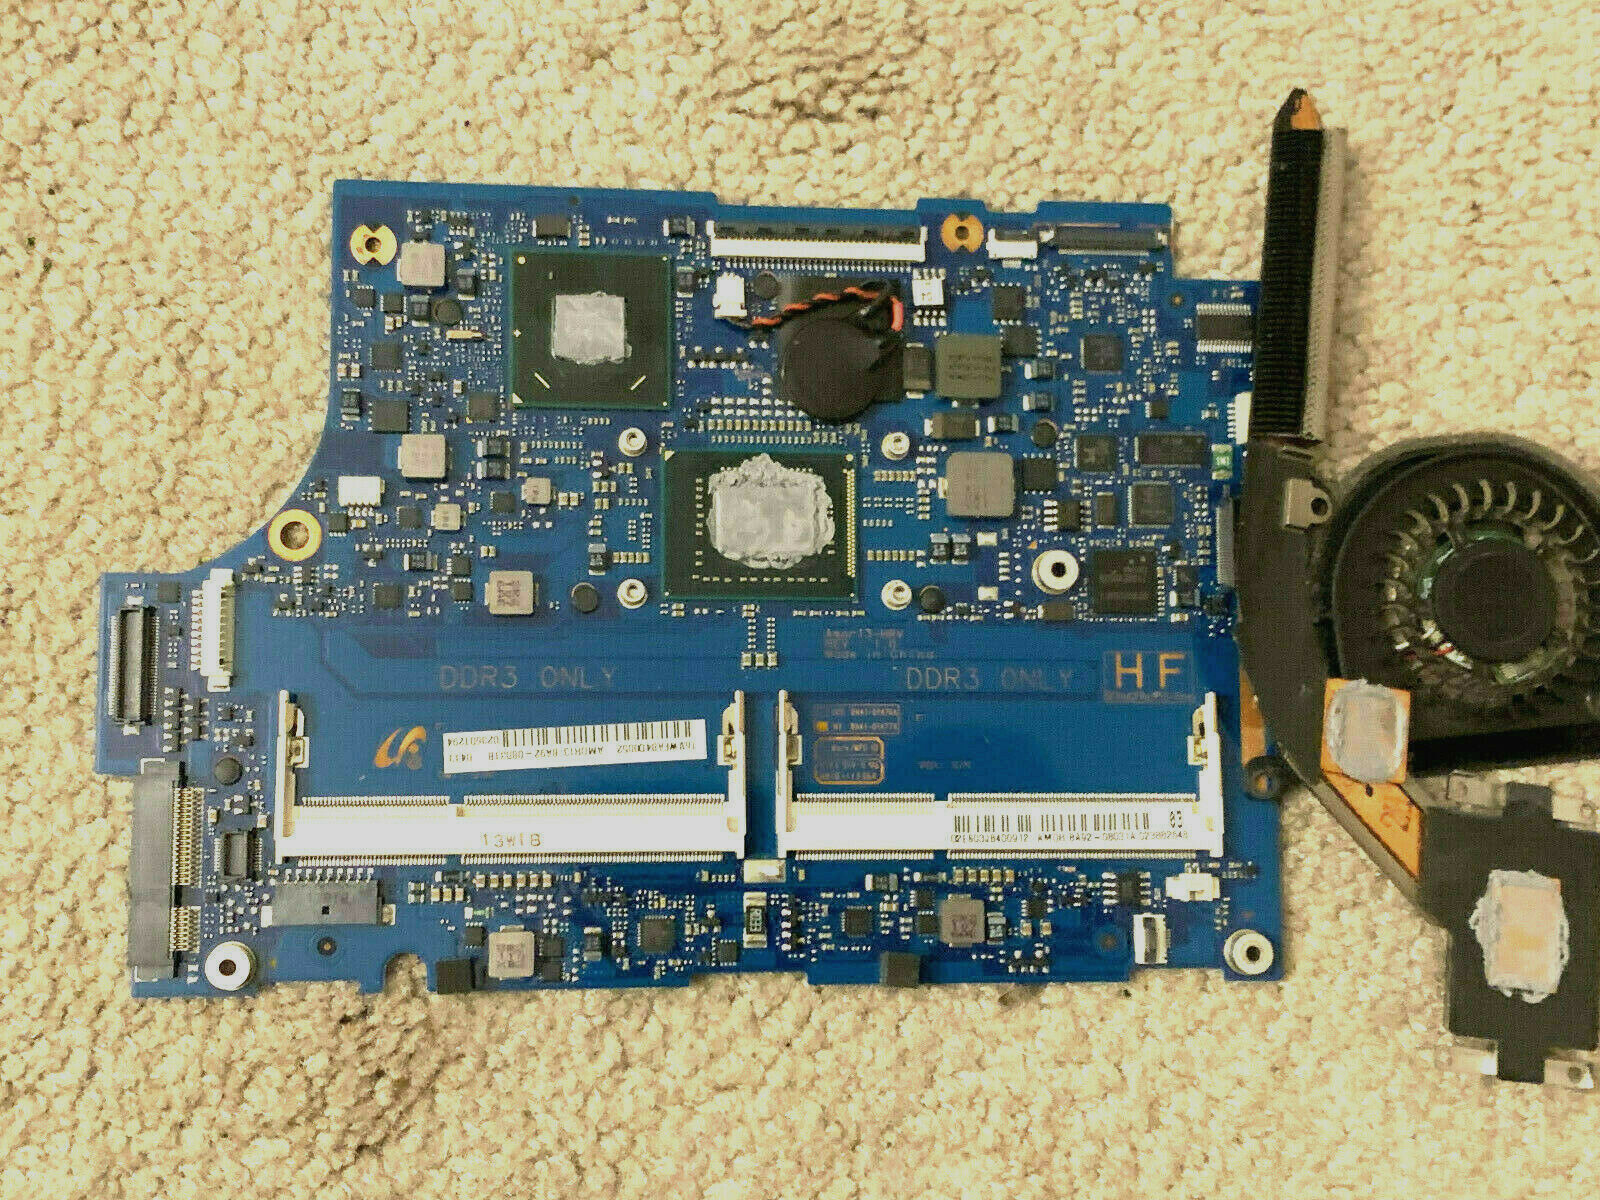 SAMSUNG 900X LAPTOP MOTHERBOARD UNTESTED - $29.69